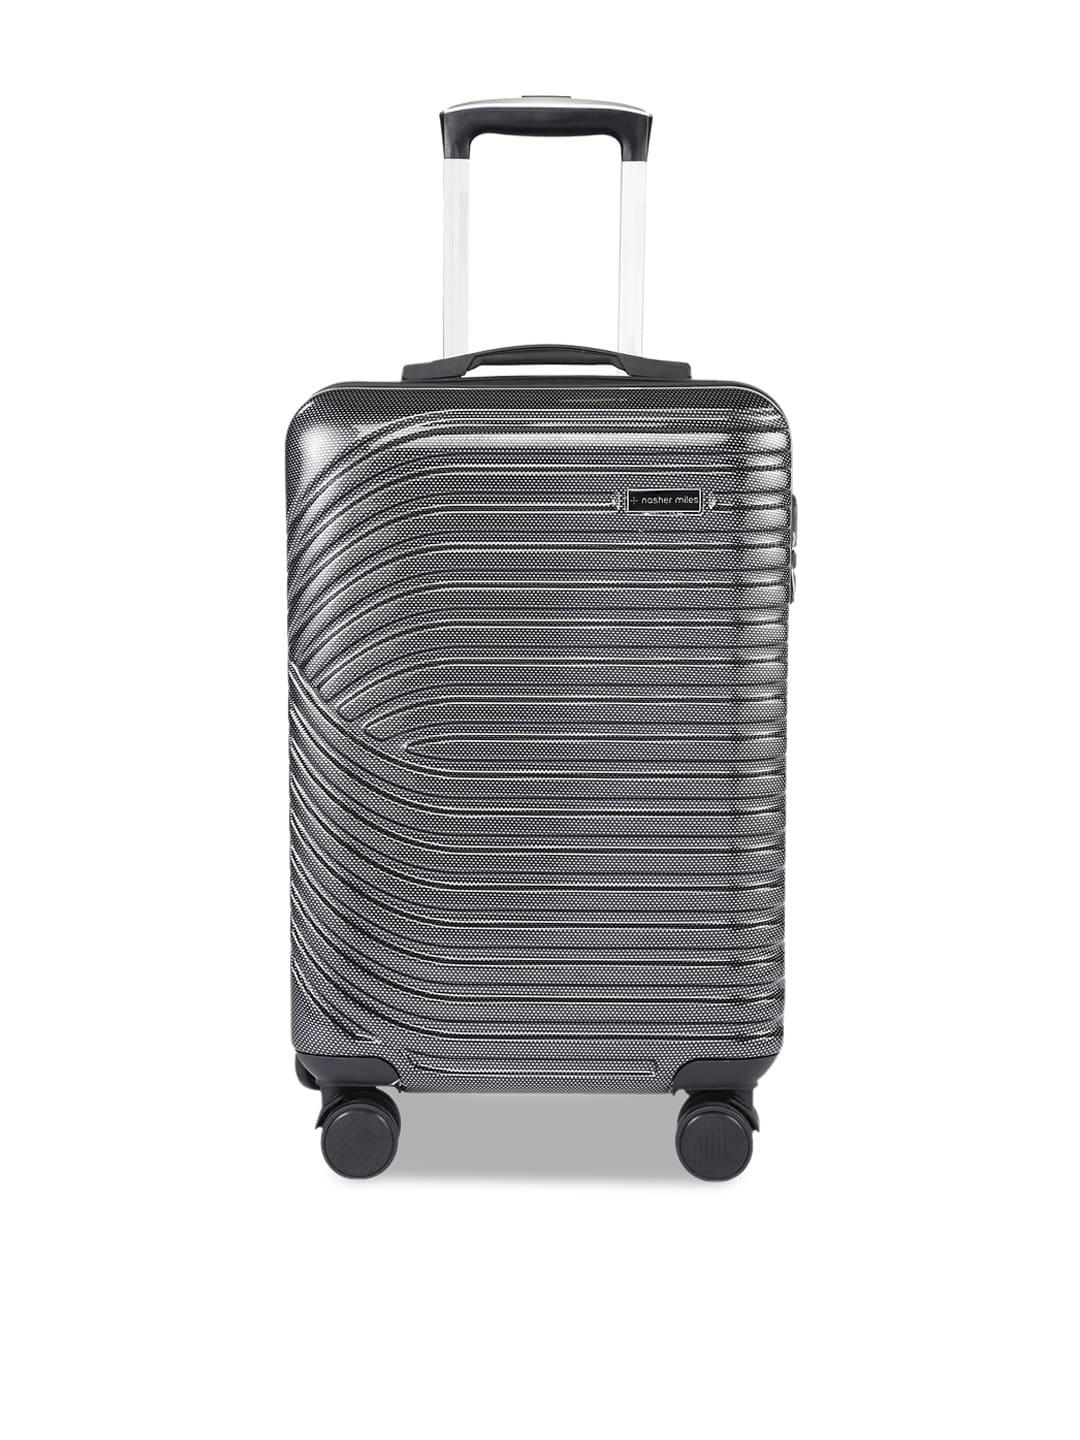 nasher miles black textured hard-sided small hard-sided trolley suitcase